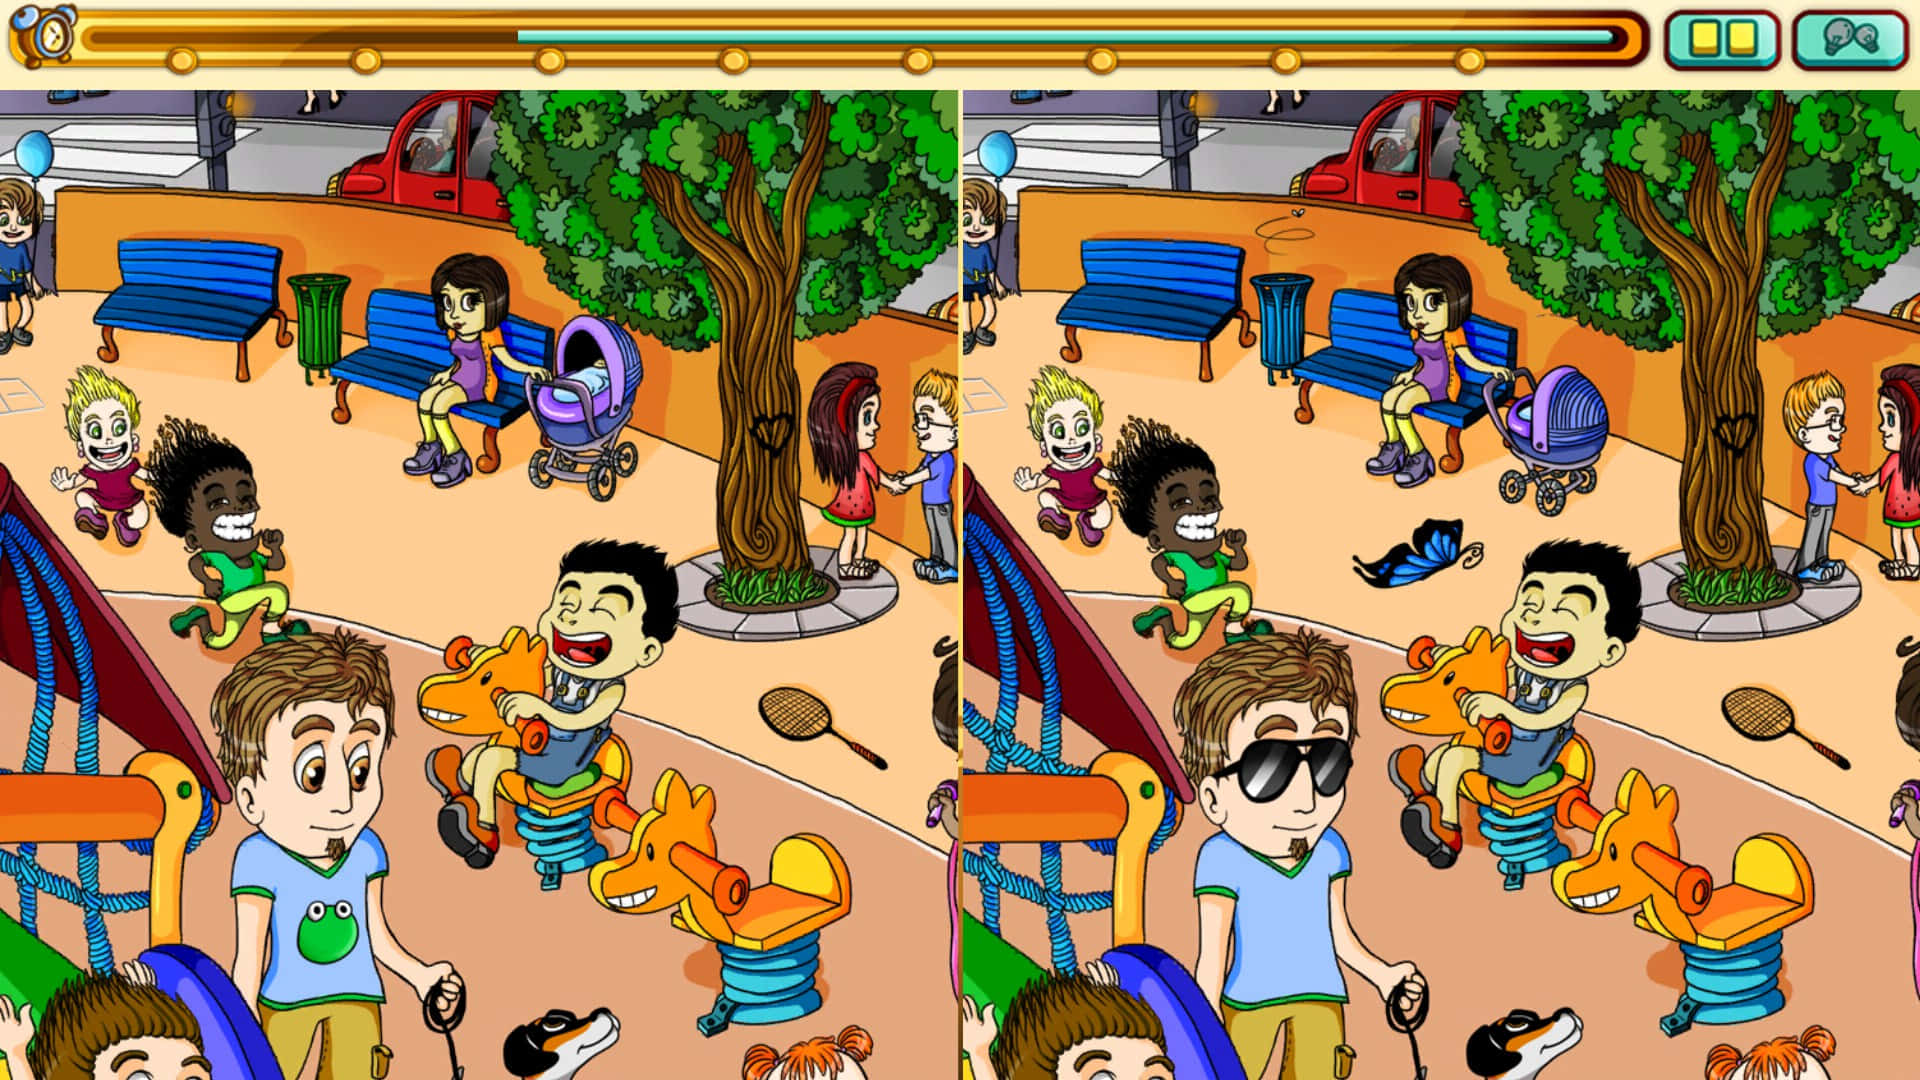 A Screenshot Of A Game With People In The Background